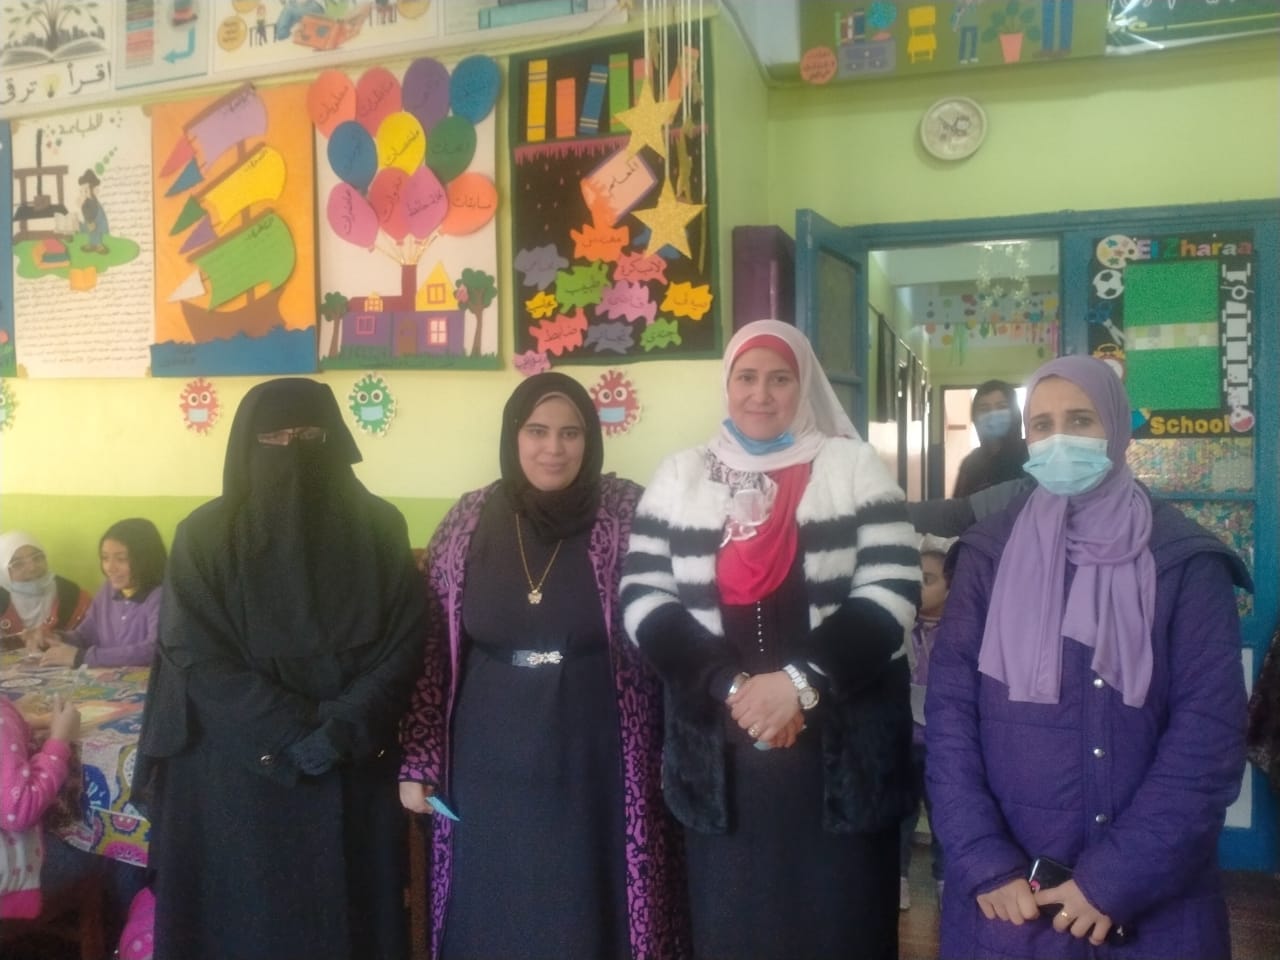 Within the framework of the initiative of the Family Counseling Center at the Faculty of Home Economics to take care of our student children, today 22/12/2021 at Al-Zahraa Islamic Private School in Shebin El-Kom, a cultural symposium was carried out under the title “The Path to Success and Excellence” on the occasion of the approaching mid-school year exams